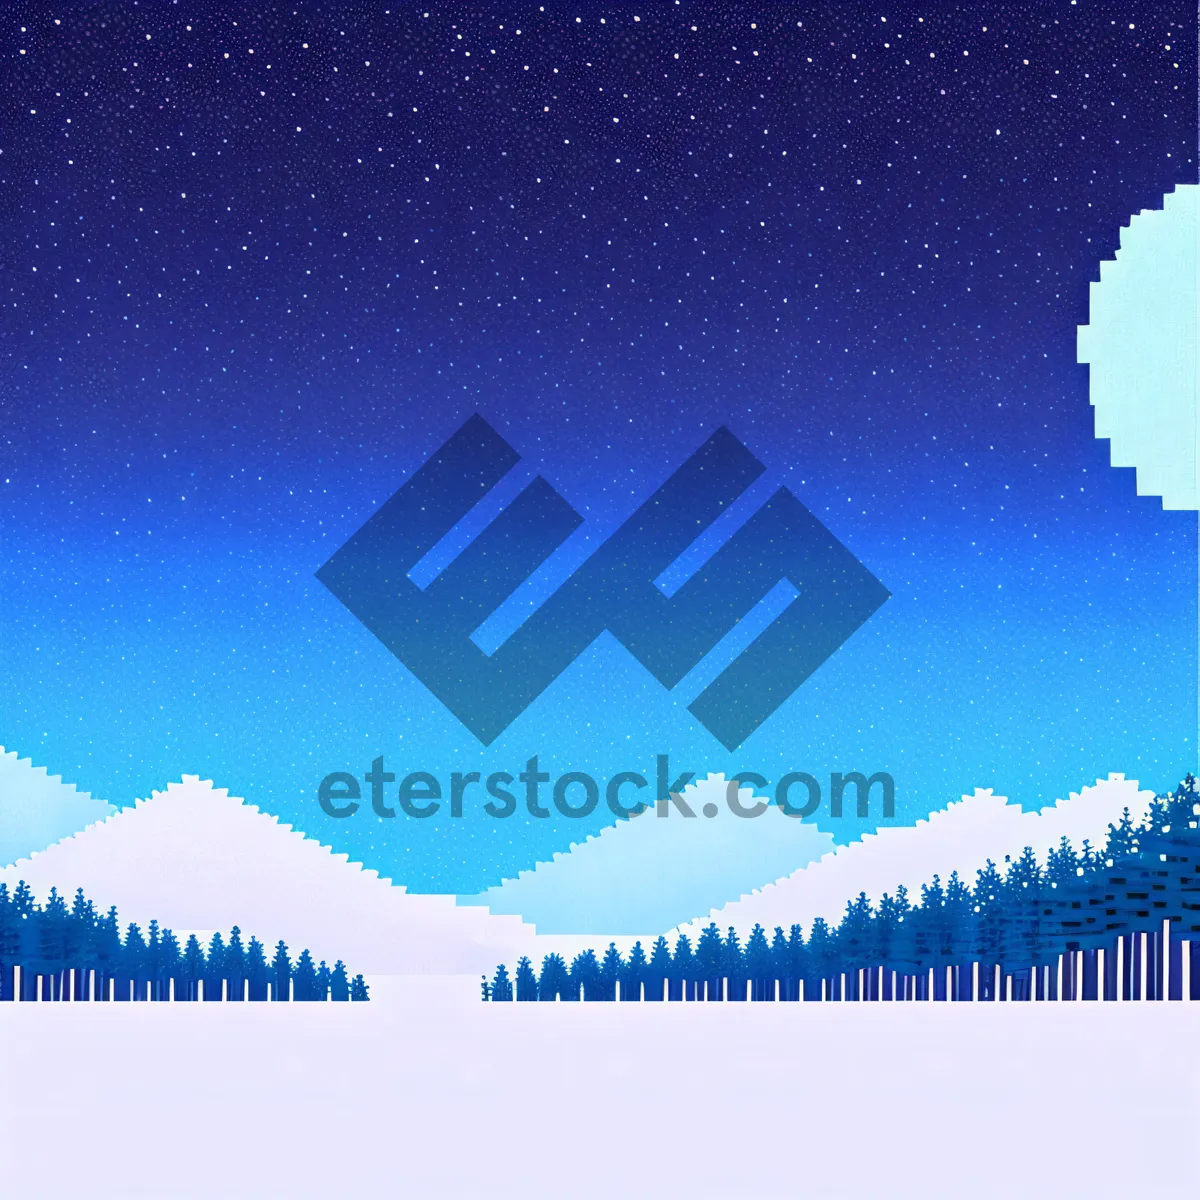 Picture of Winter Wonderland: Snowy Tree Landscape on Electronic Display